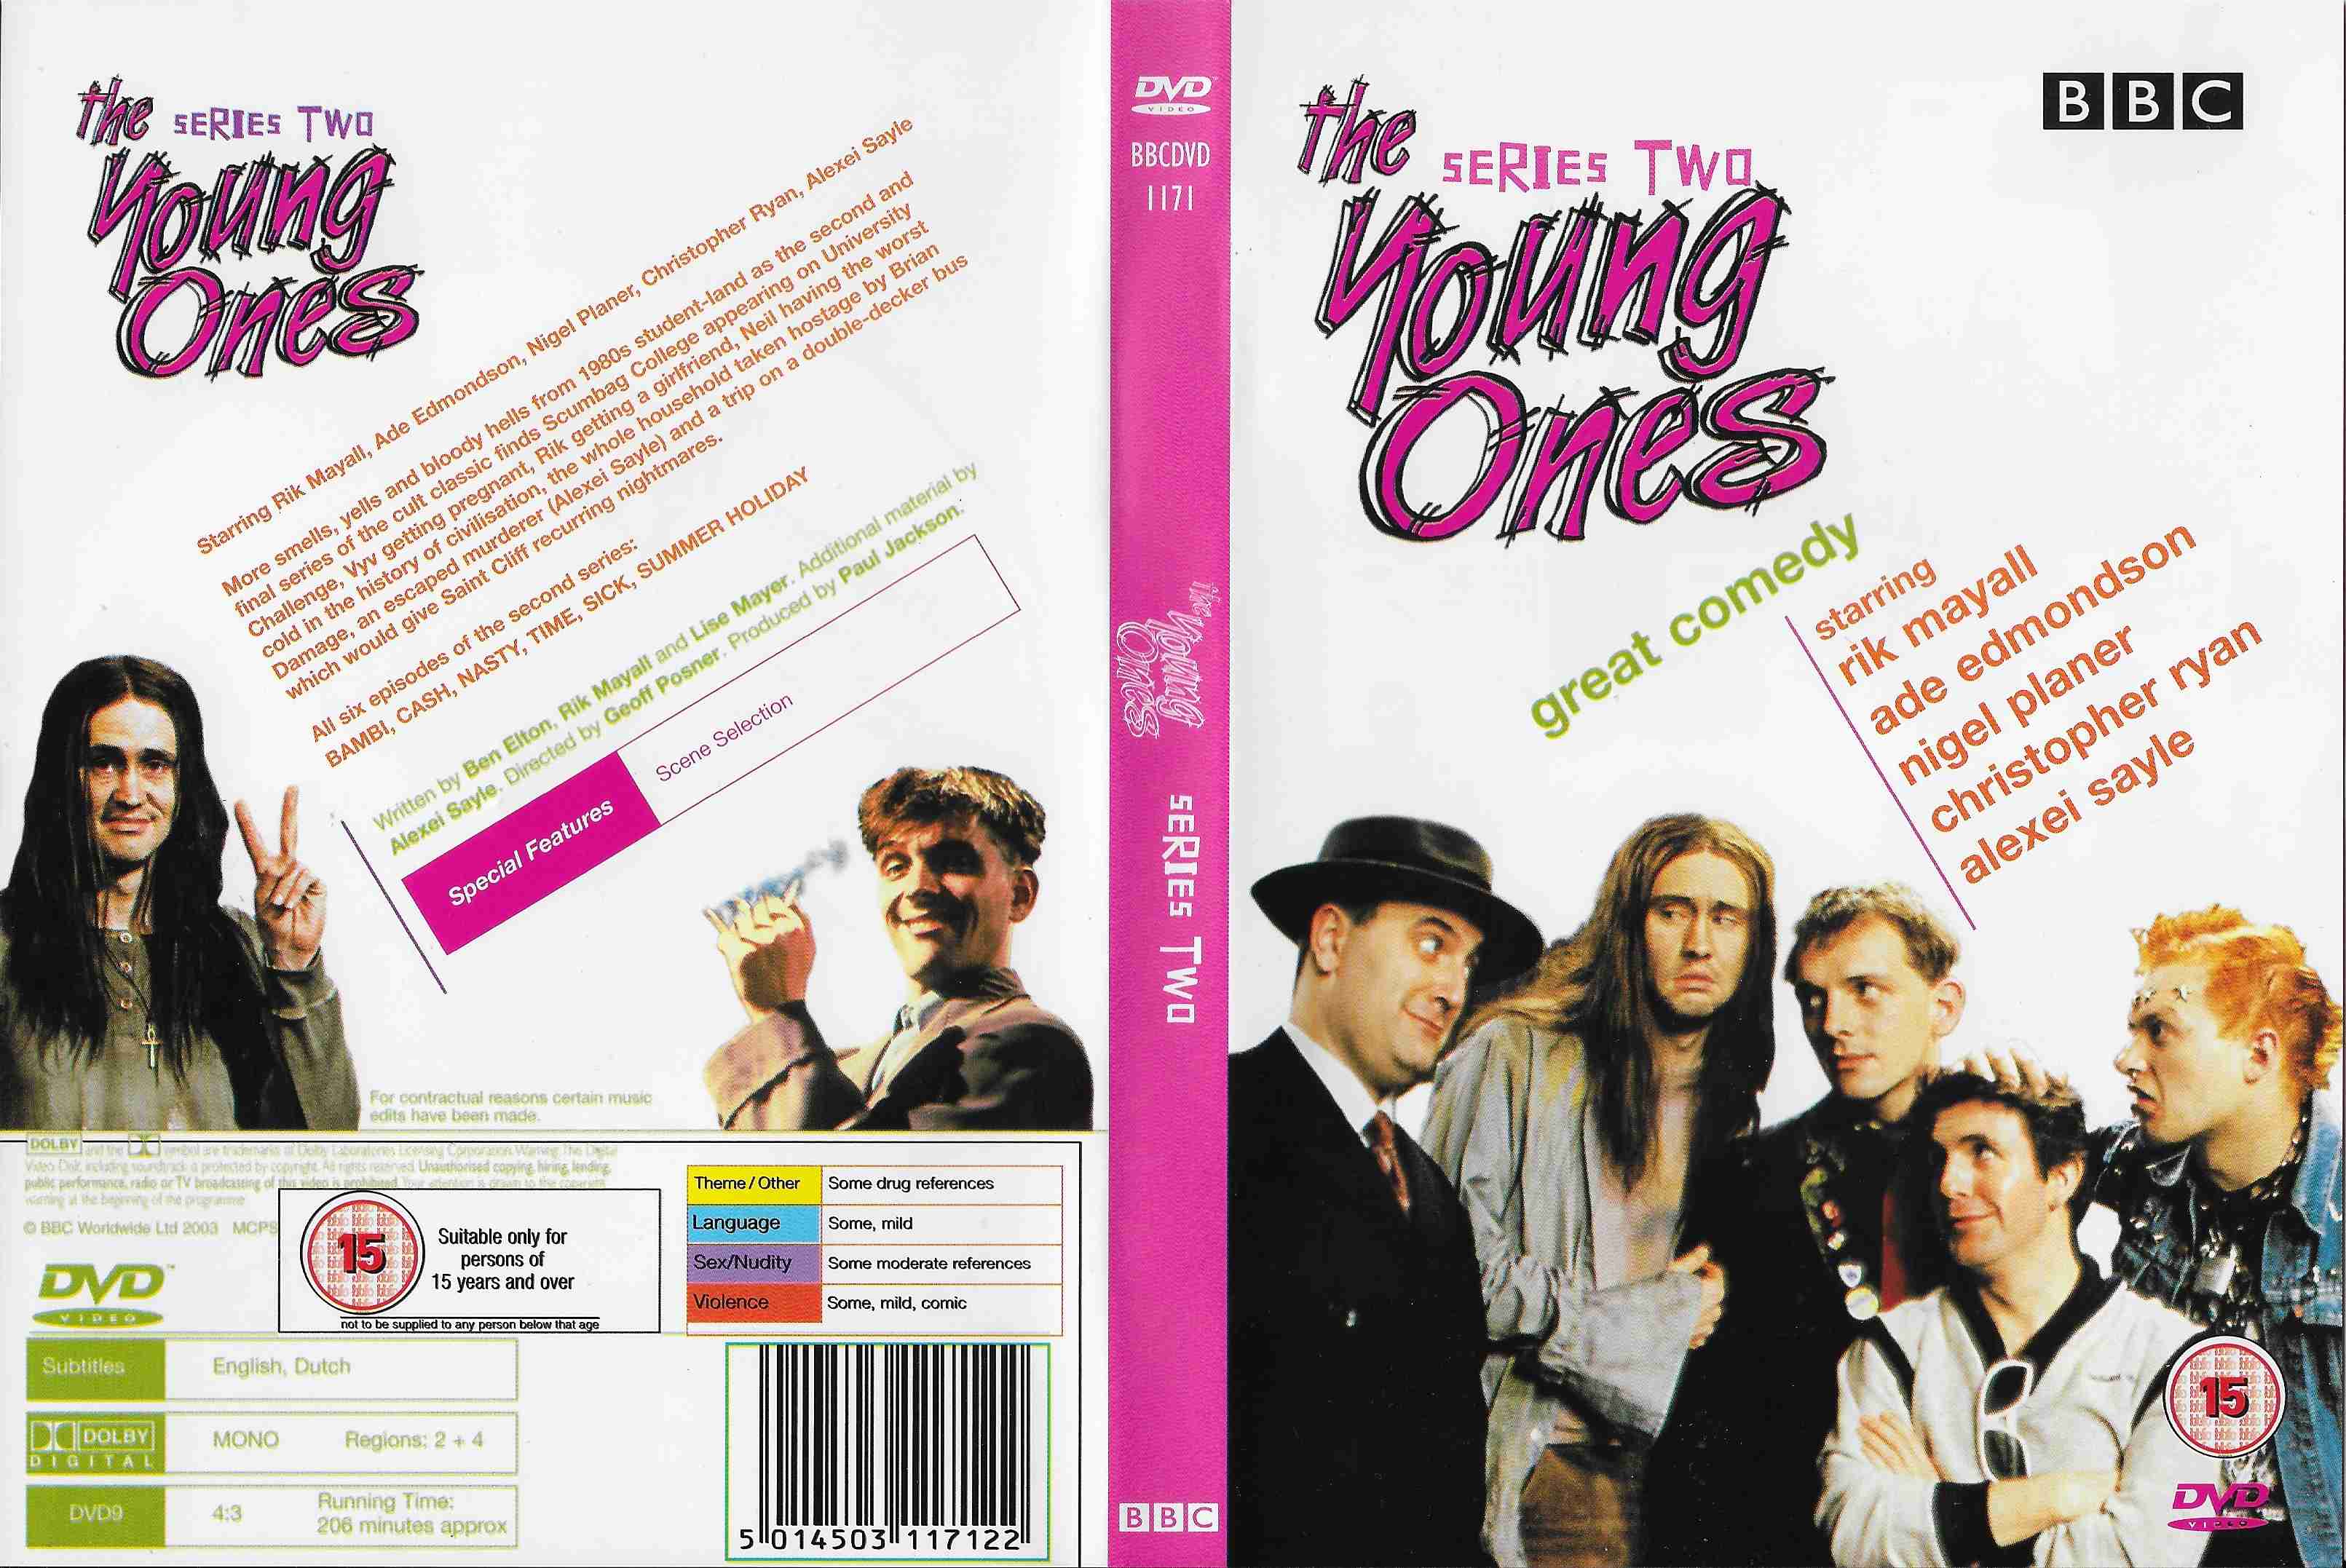 Picture of BBCDVD 1171 The young ones - Series 2 by artist Ben Elton / Rik Mayall / Lise Mayer / Alexei Sayle from the BBC records and Tapes library